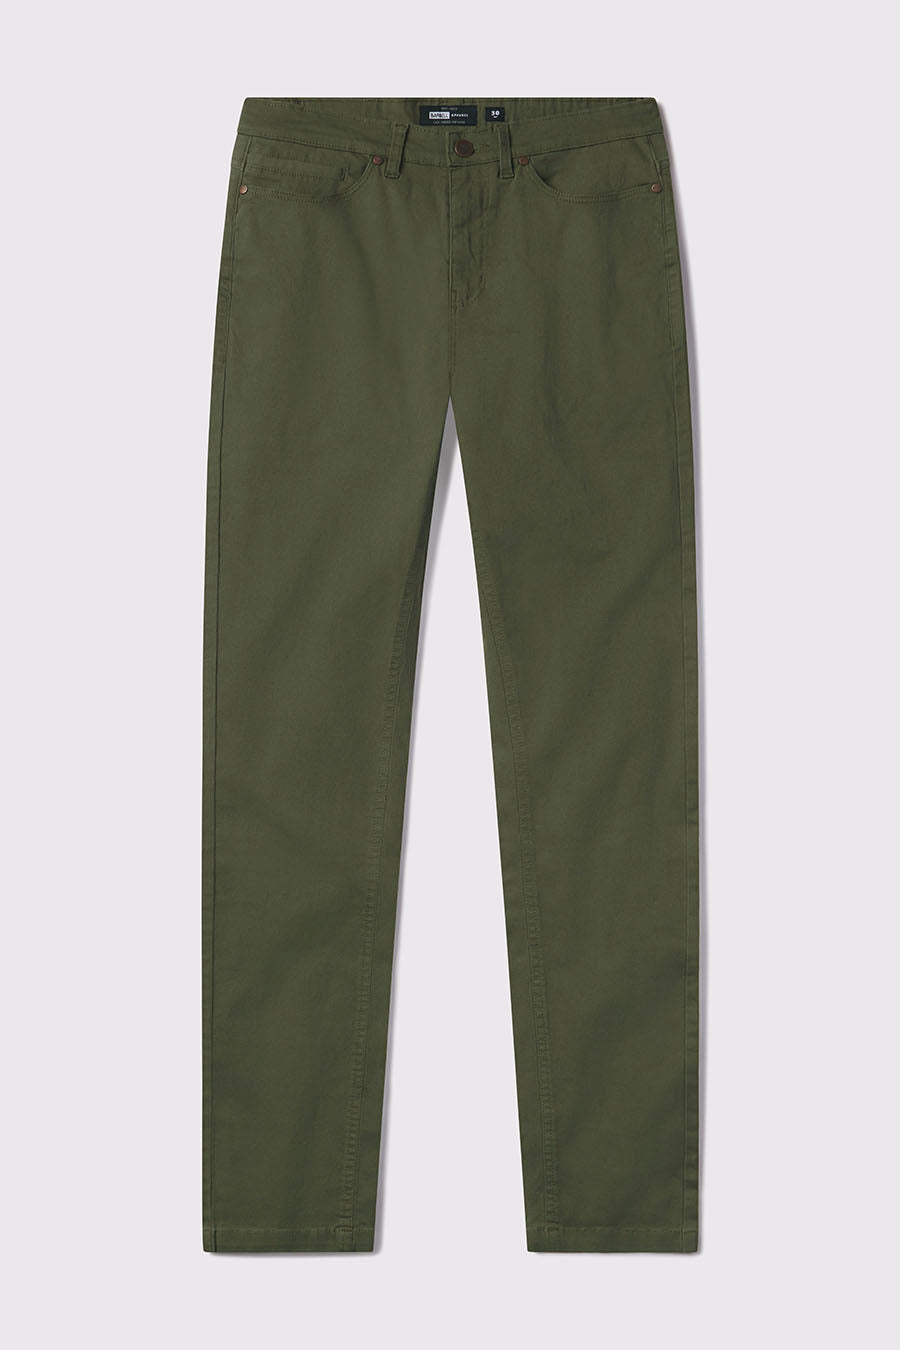 Athletic Fit Chino Pant 2.0 - Drab - photo from front flat lay #color_drab